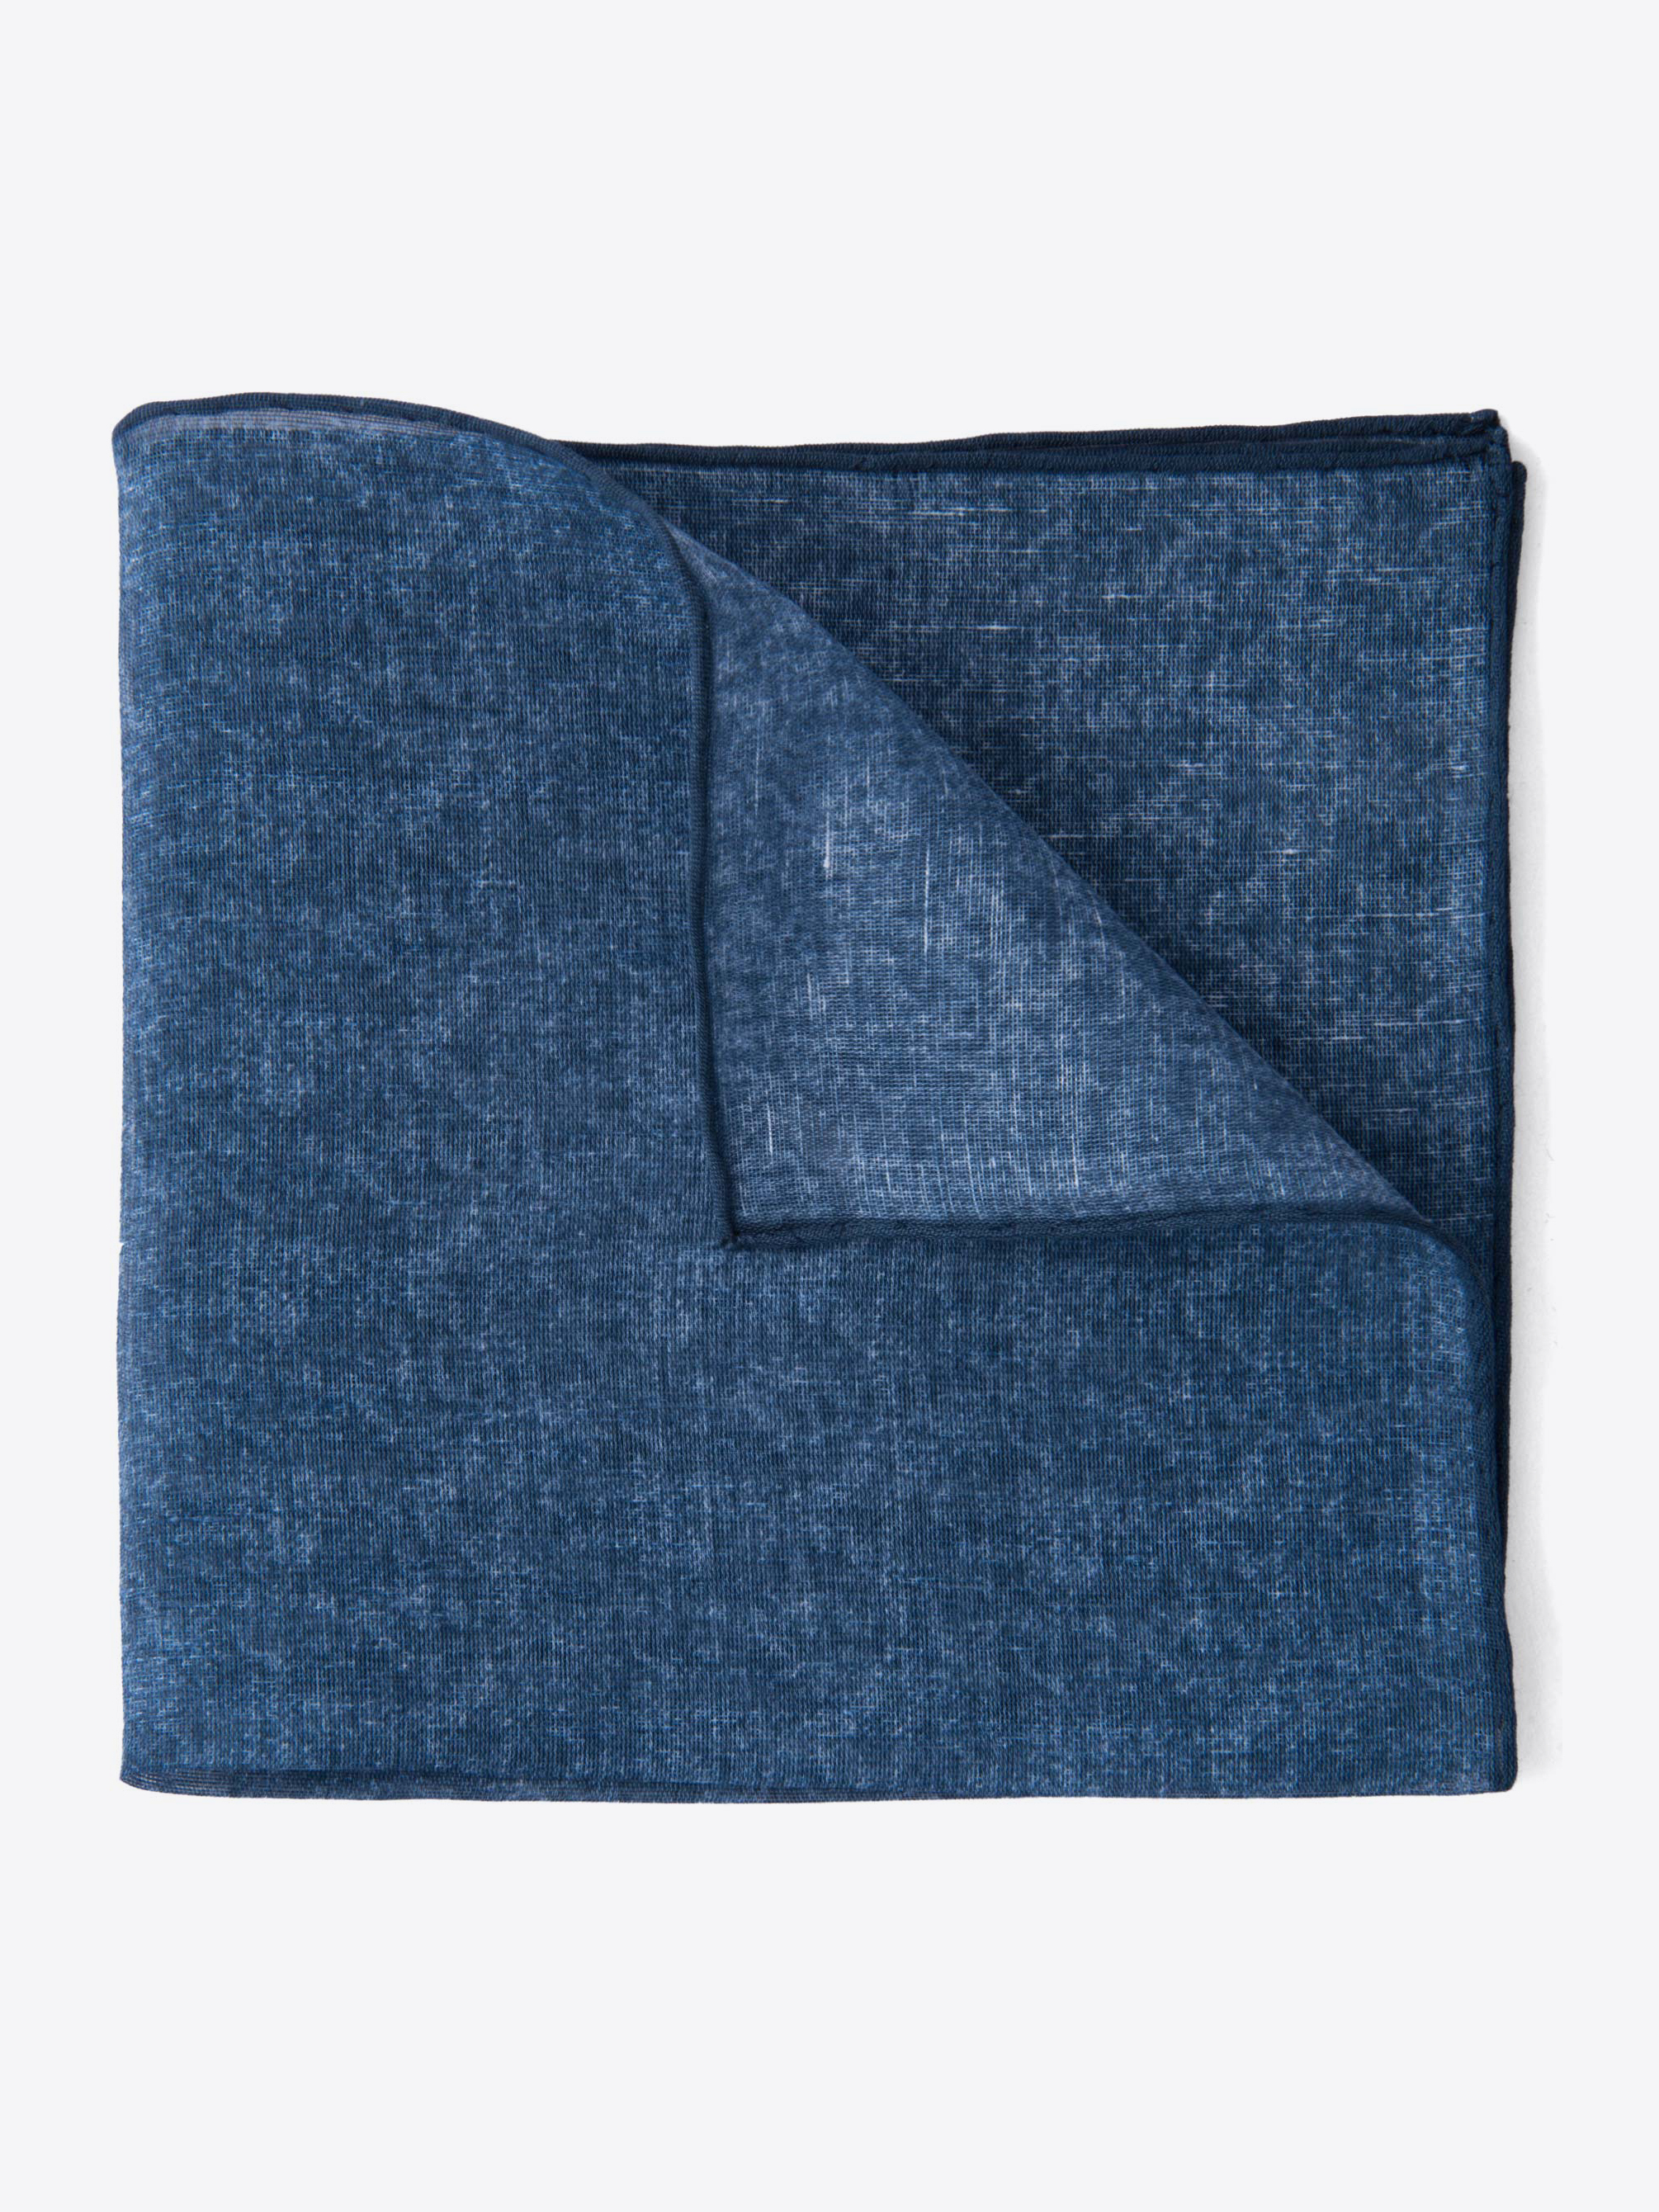 Zoom Image of Navy Cotton Linen Pocket Square